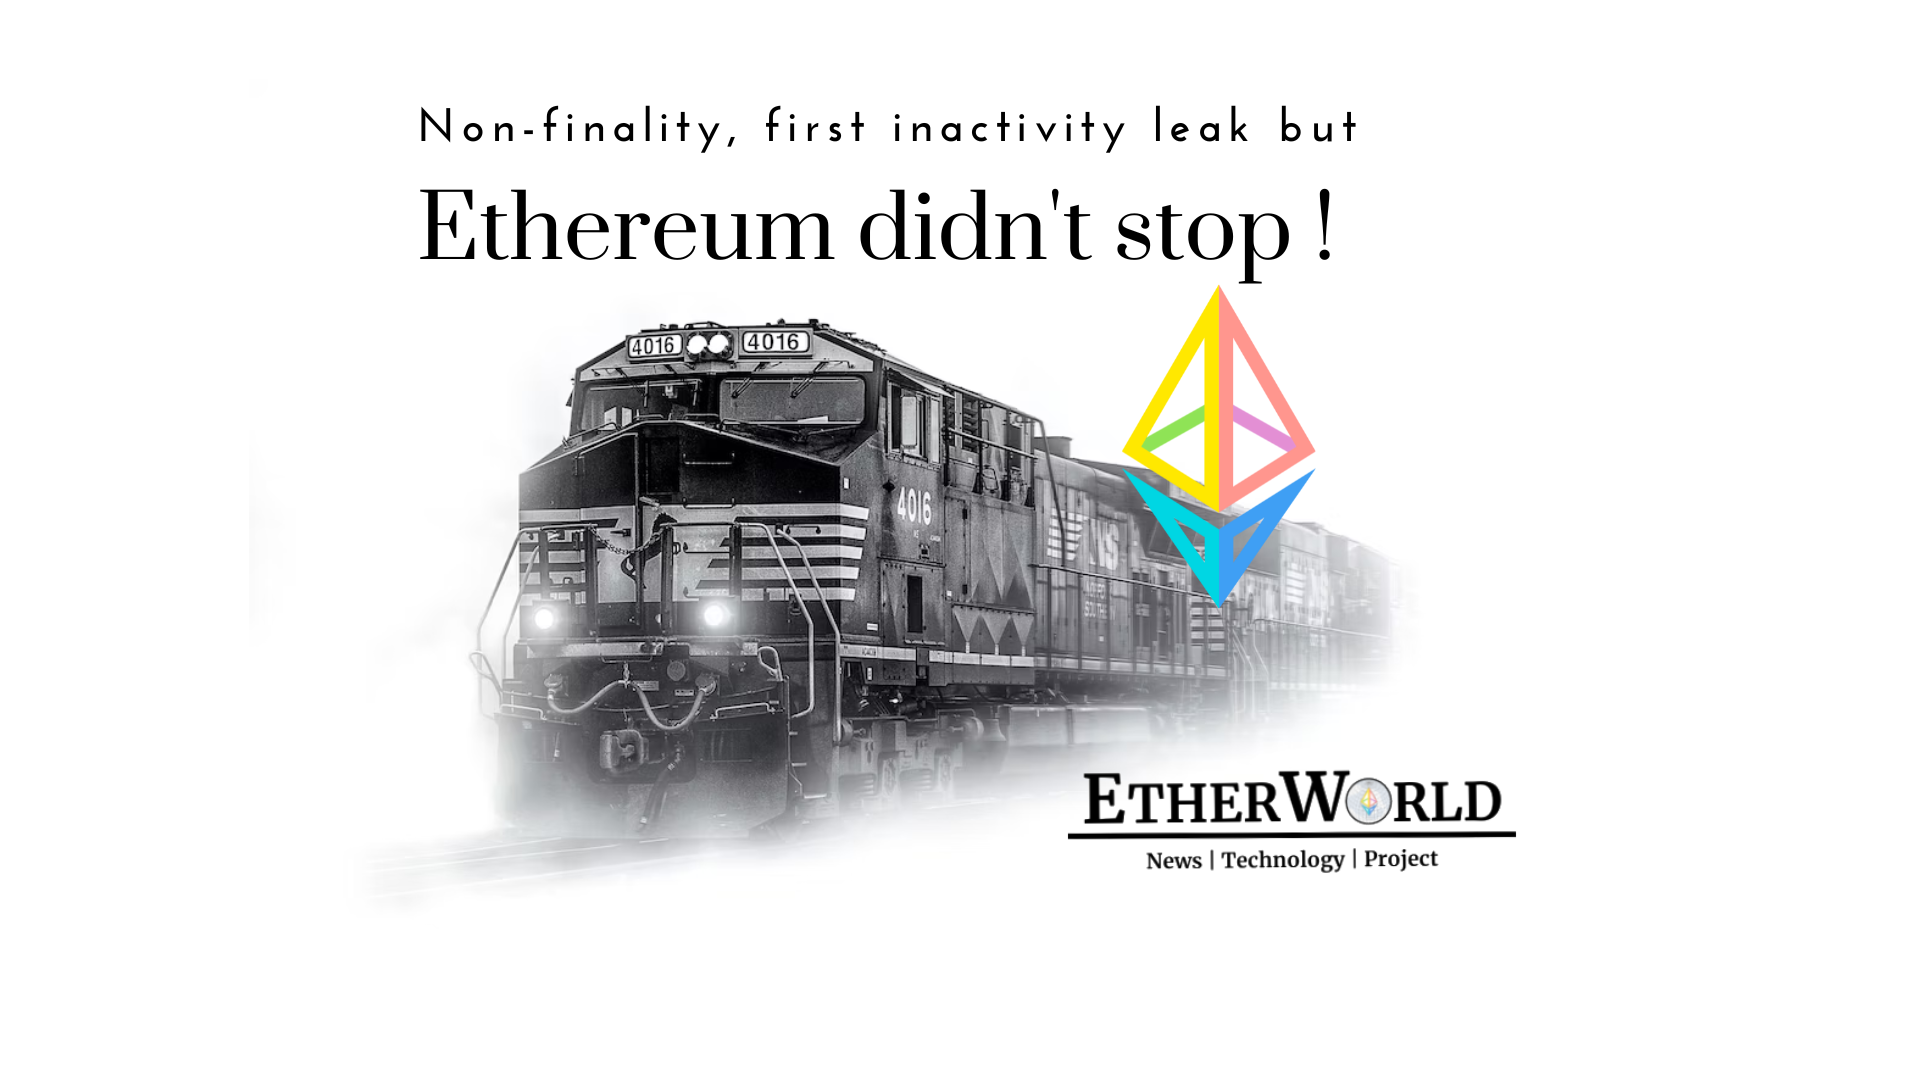 Non-finality, inactivity leak but Ethereum didn't stop!